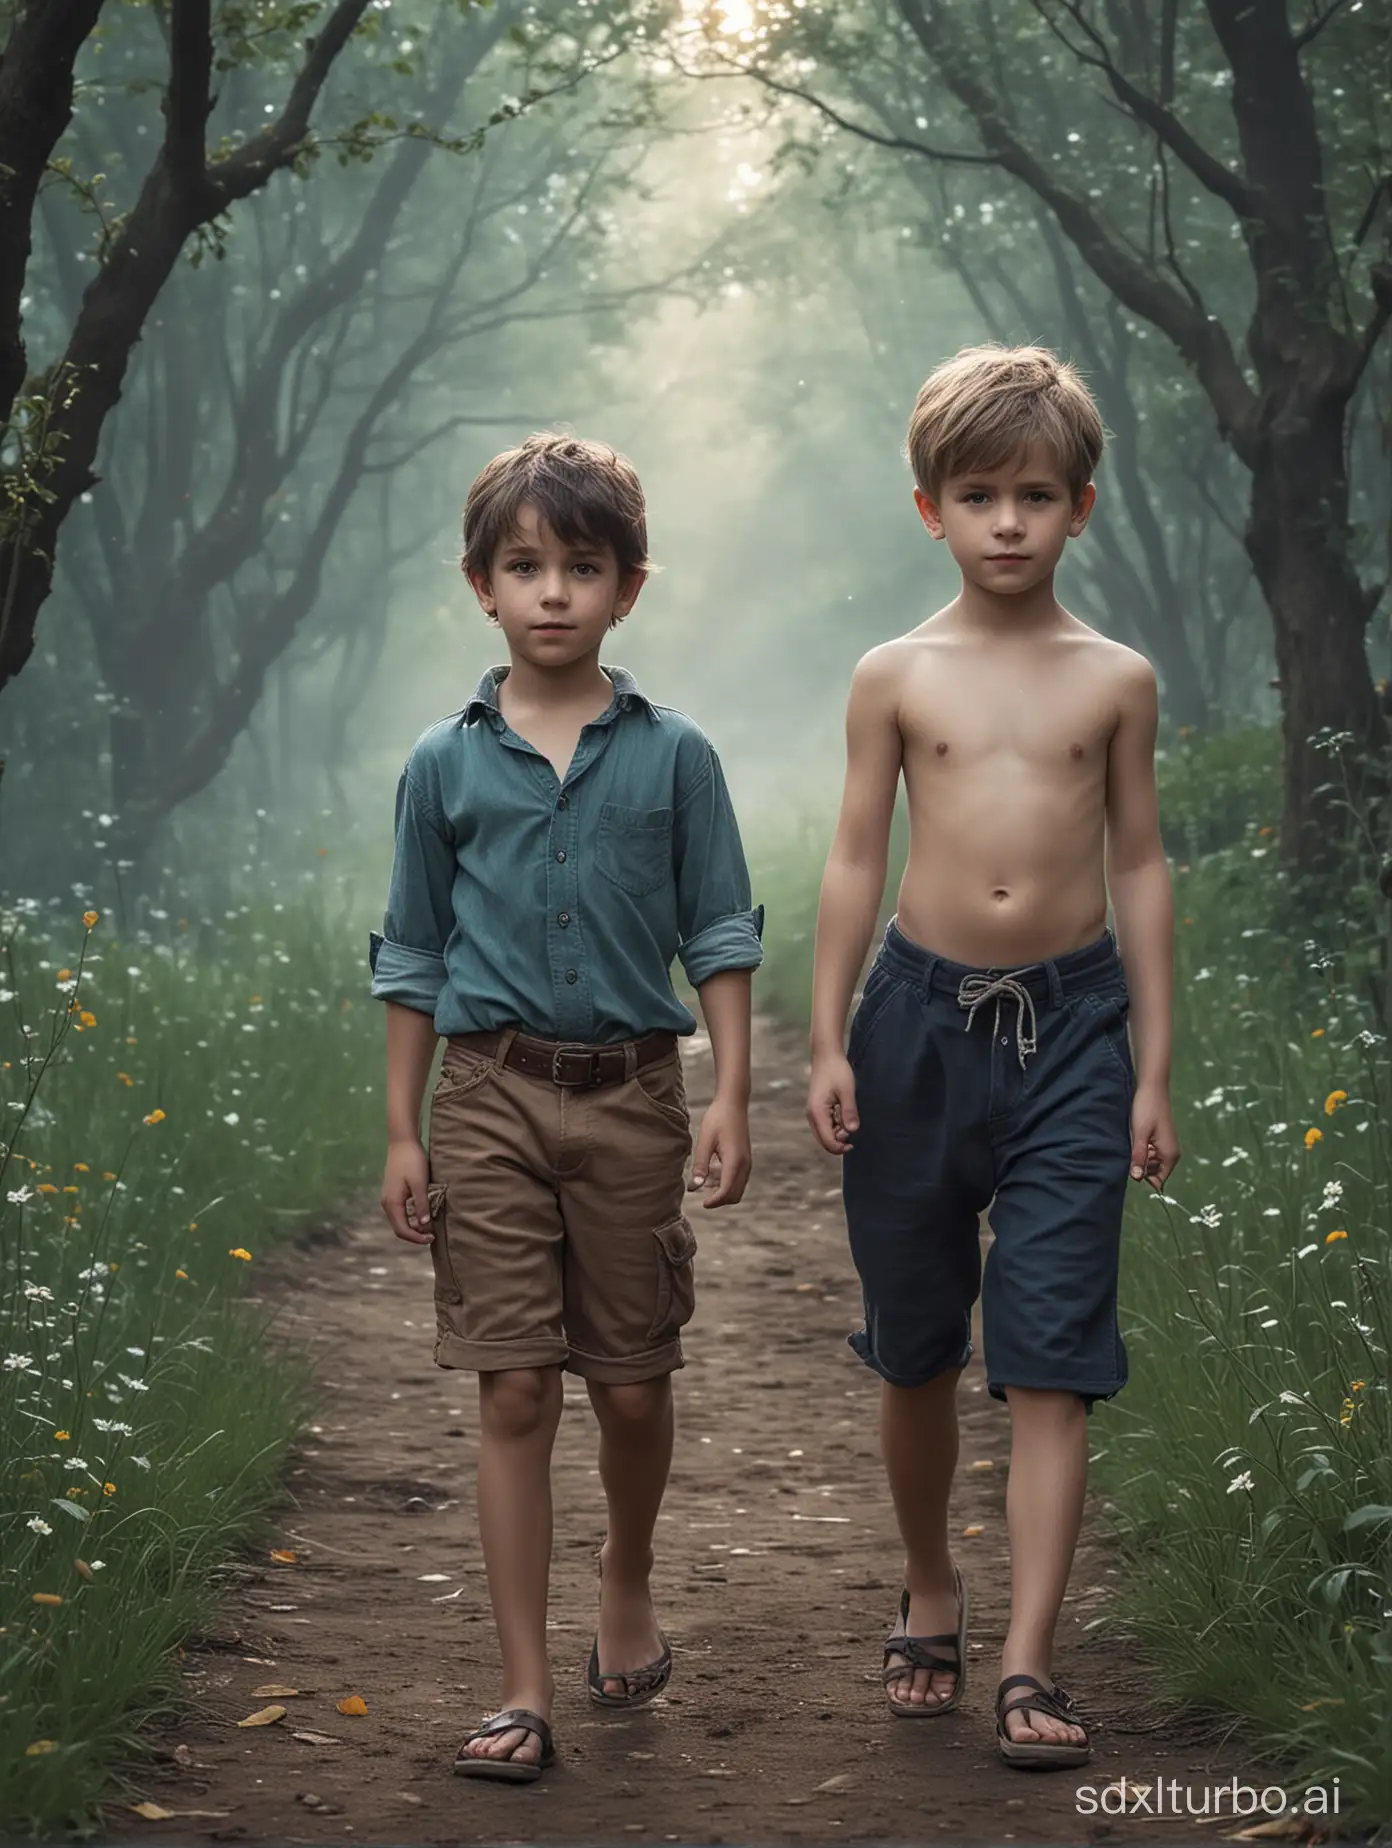 Young-Boys-Embracing-Fantasy-Adventure-in-Enchanted-Forest